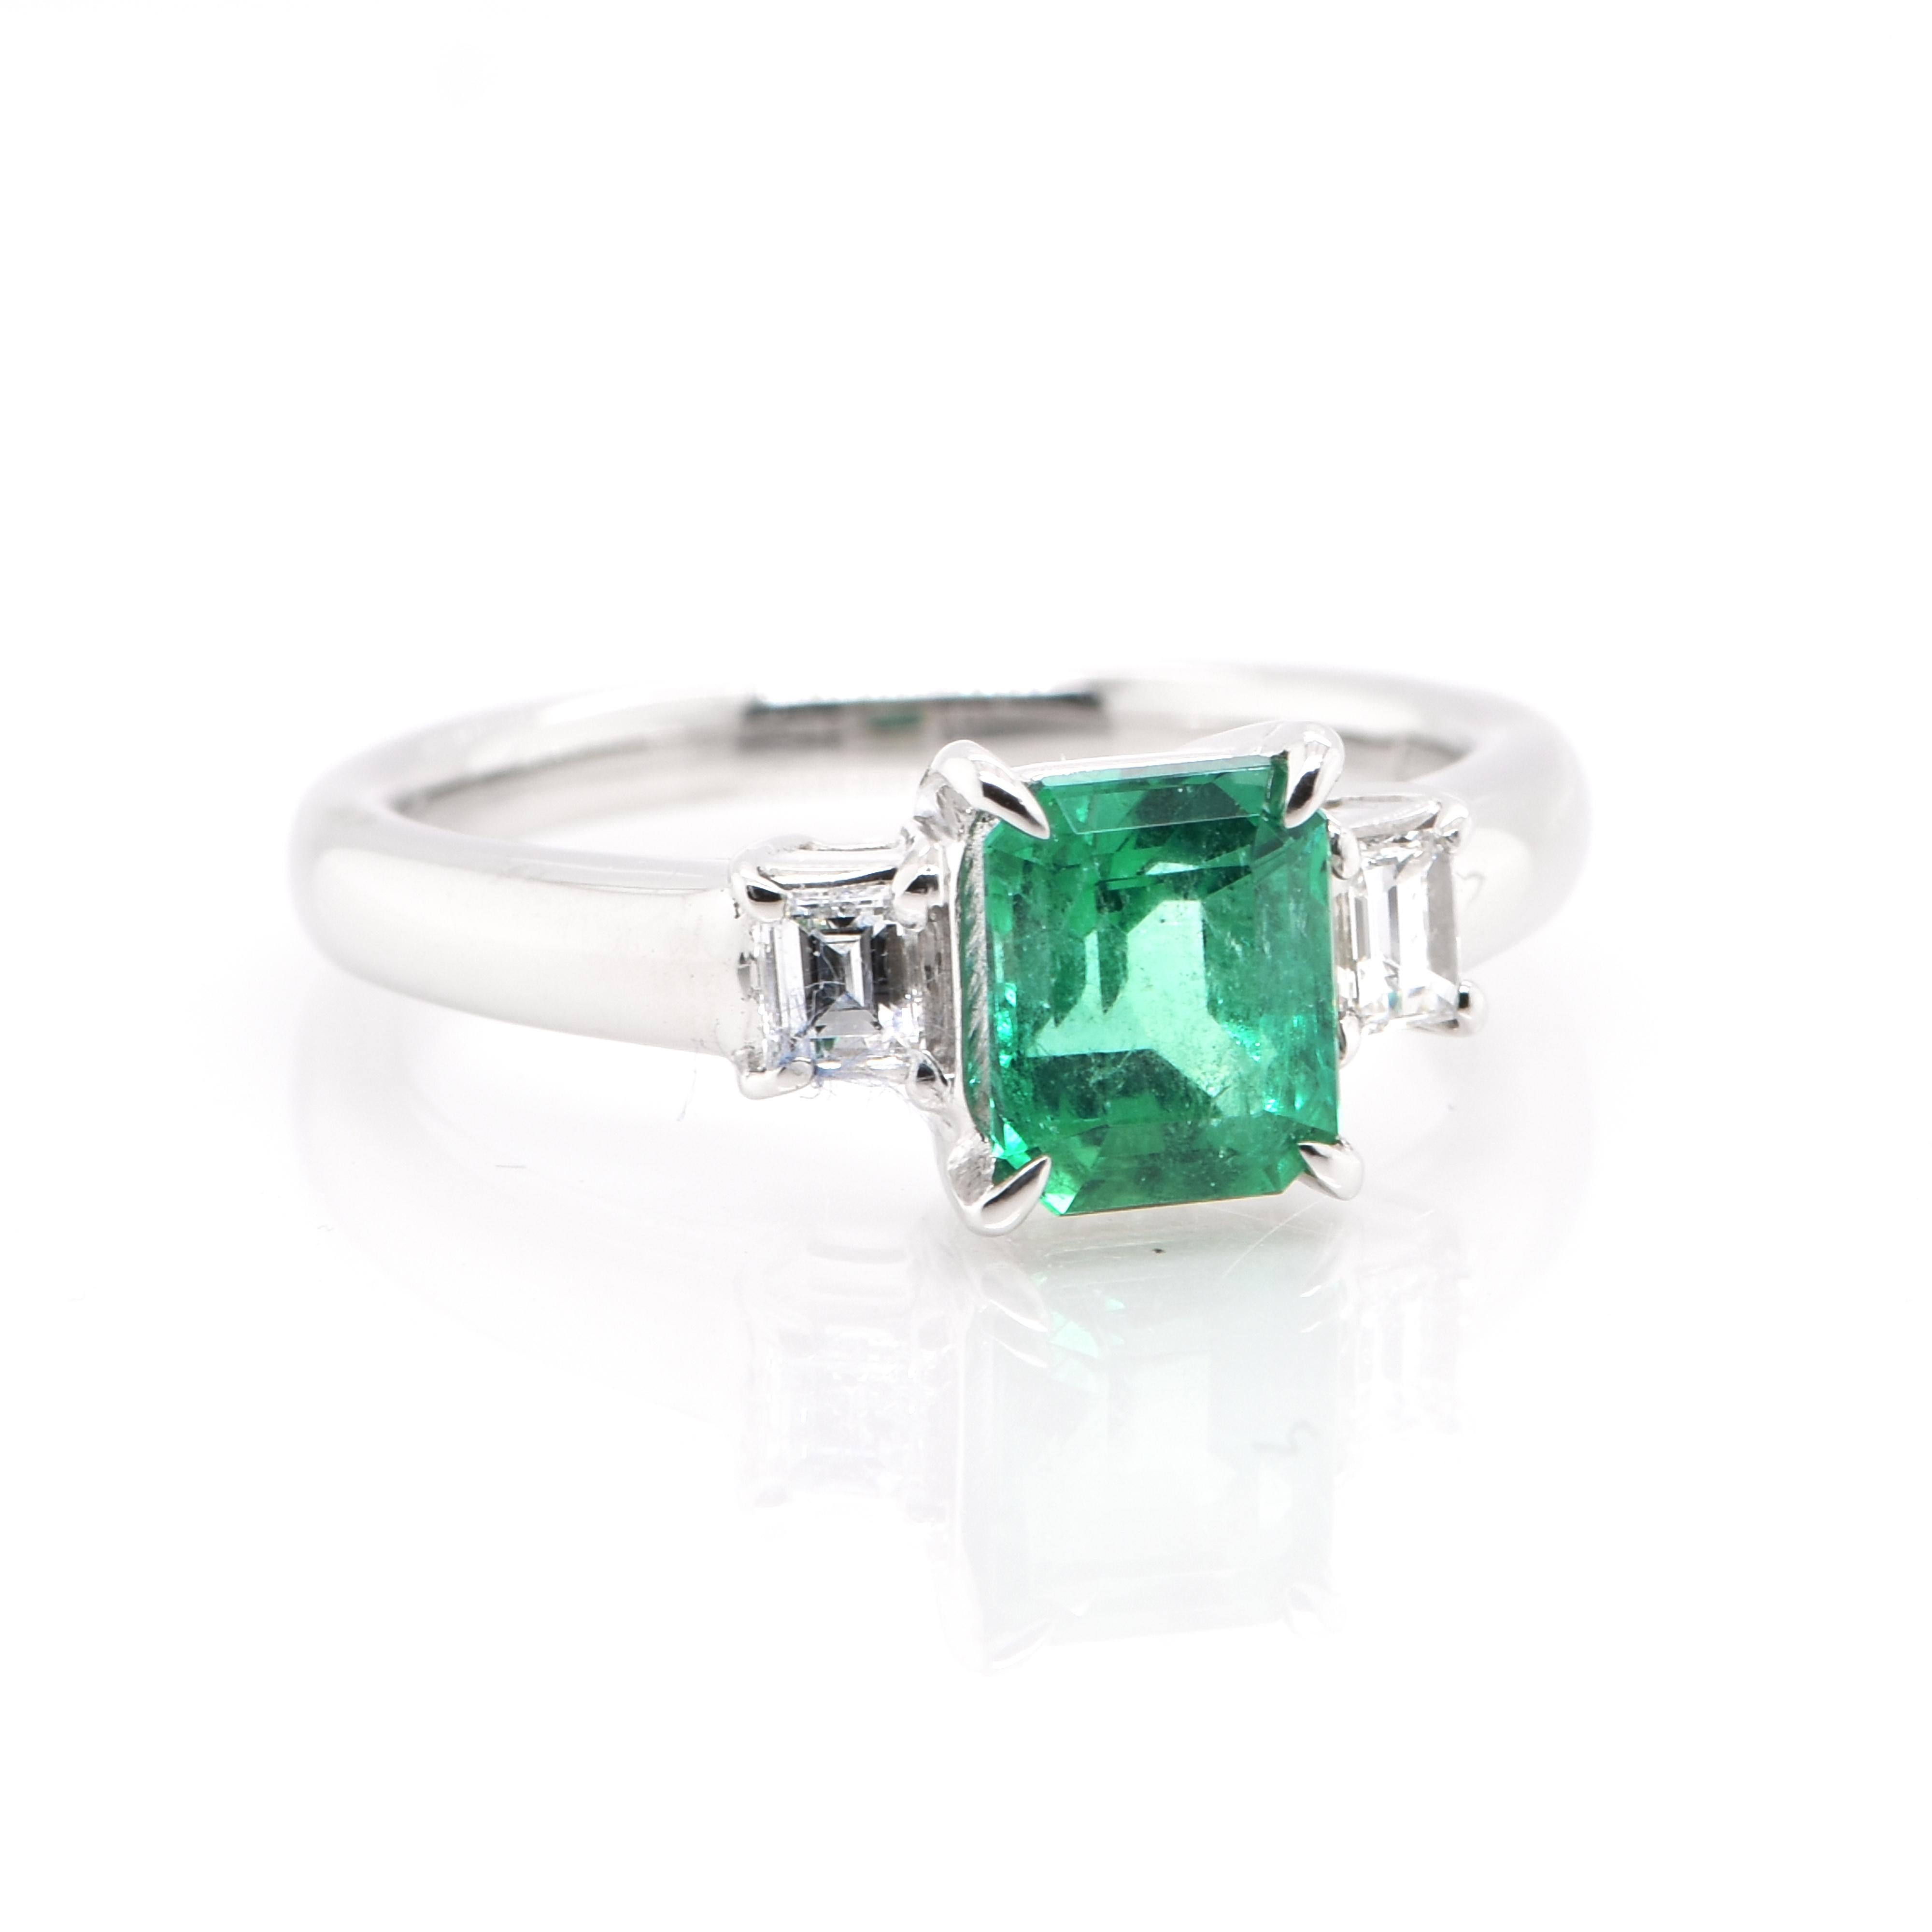 Modern 1.08 Carat Natural Colombian Emerald Three Stone Ring Set in Platinum